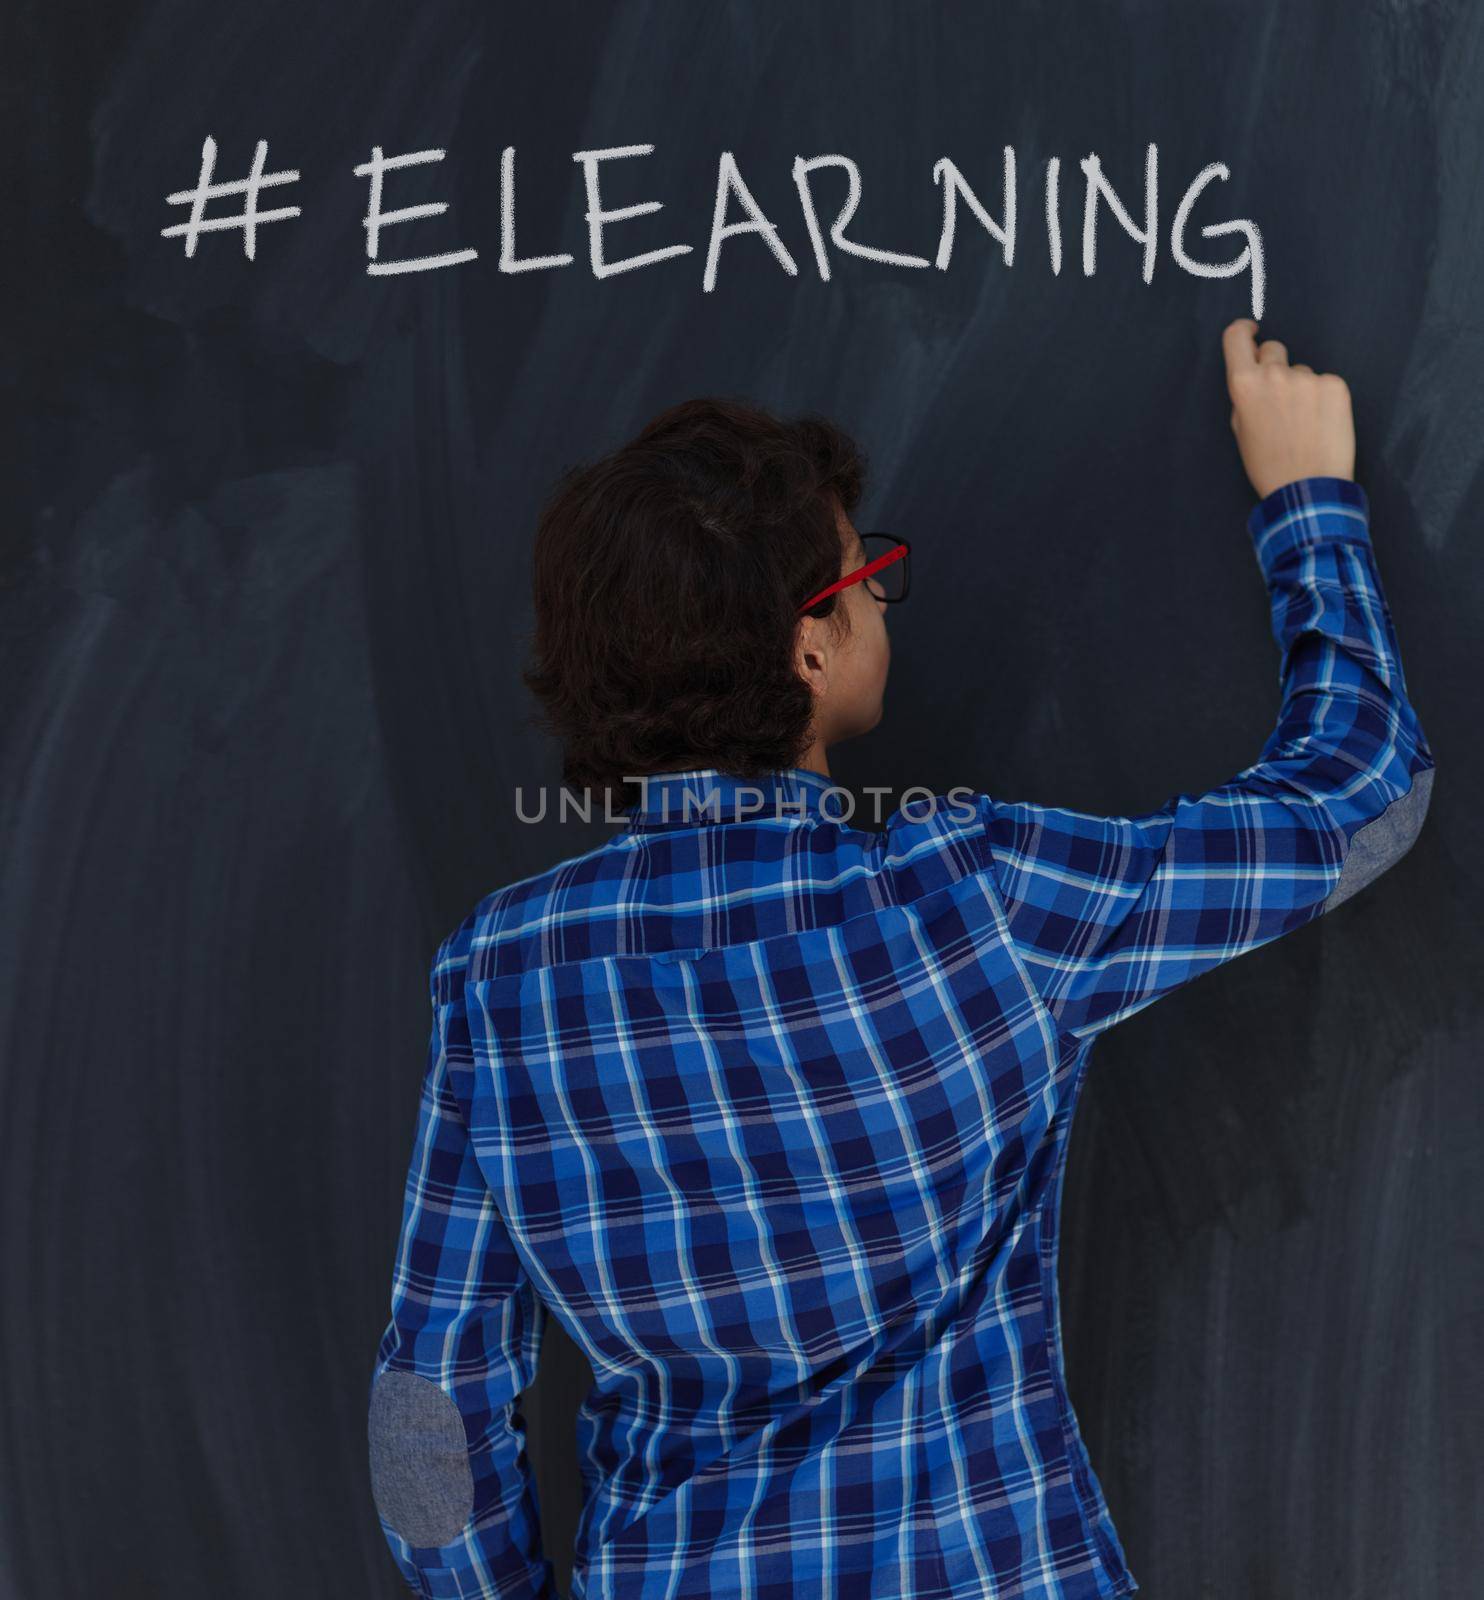 Smart  Teen Boy writing with chalk hashtag elearning  on  black board in school coronavirus stay at home concept